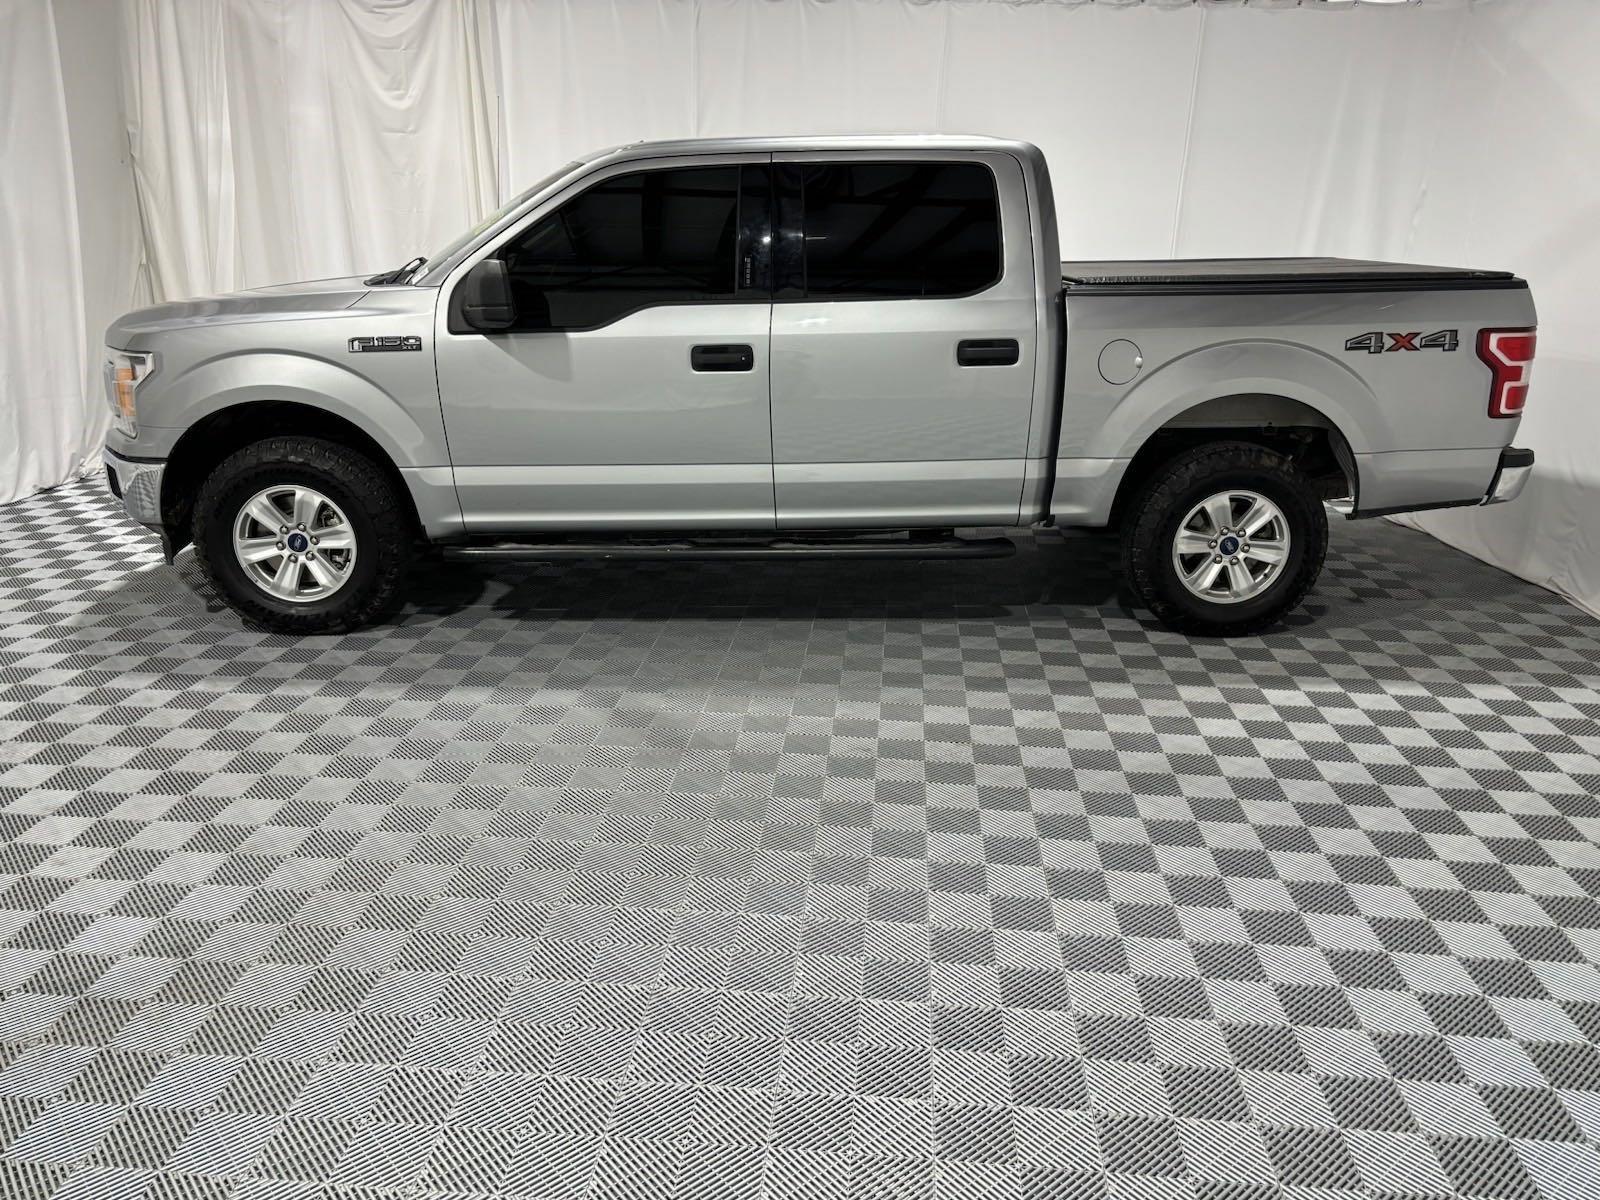 Used 2020 Ford F-150 XLT SuperCrew Cab Styleside for sale in St Joseph MO